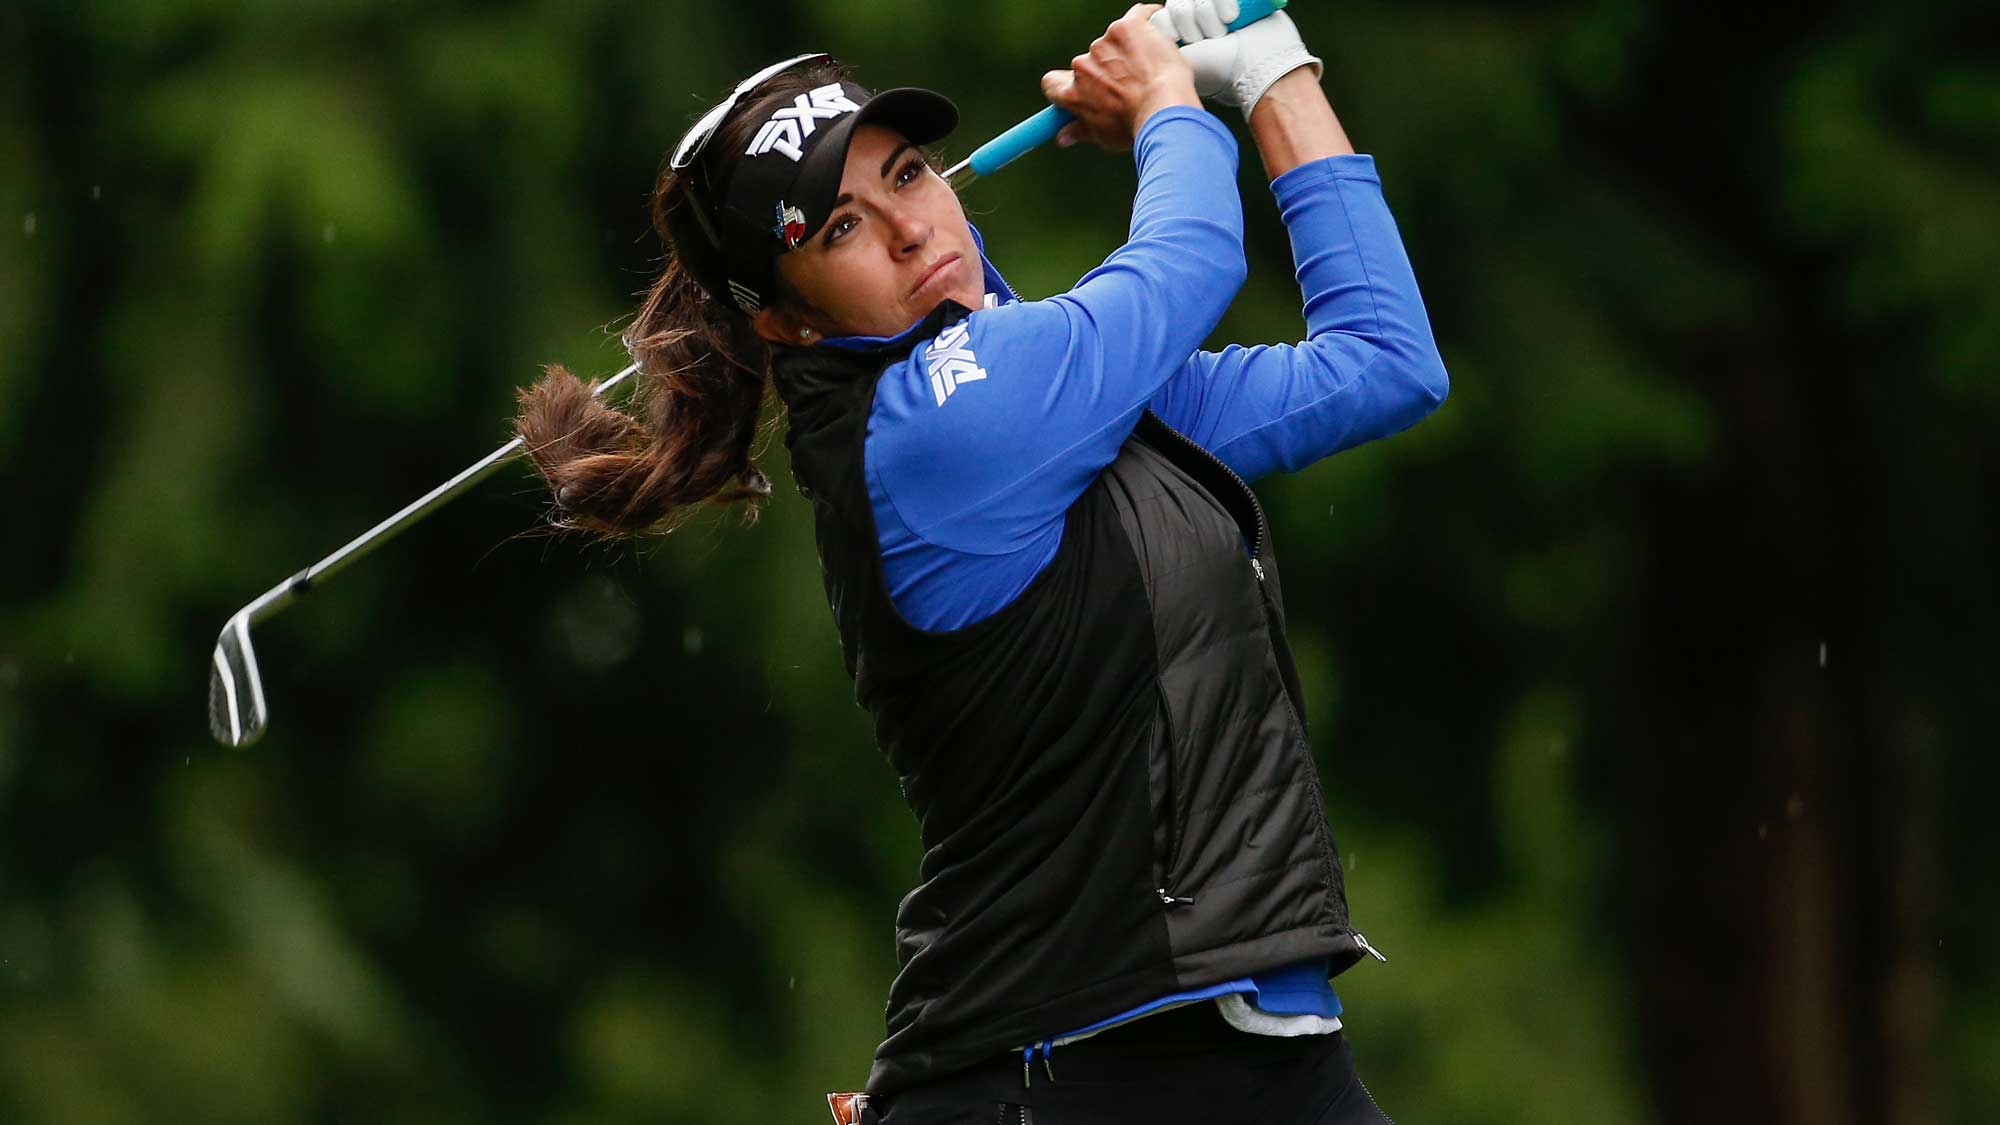 Gerina Piller hits a tee shot on the 9th tee during the third round of the KPMG Women's PGA Championship 